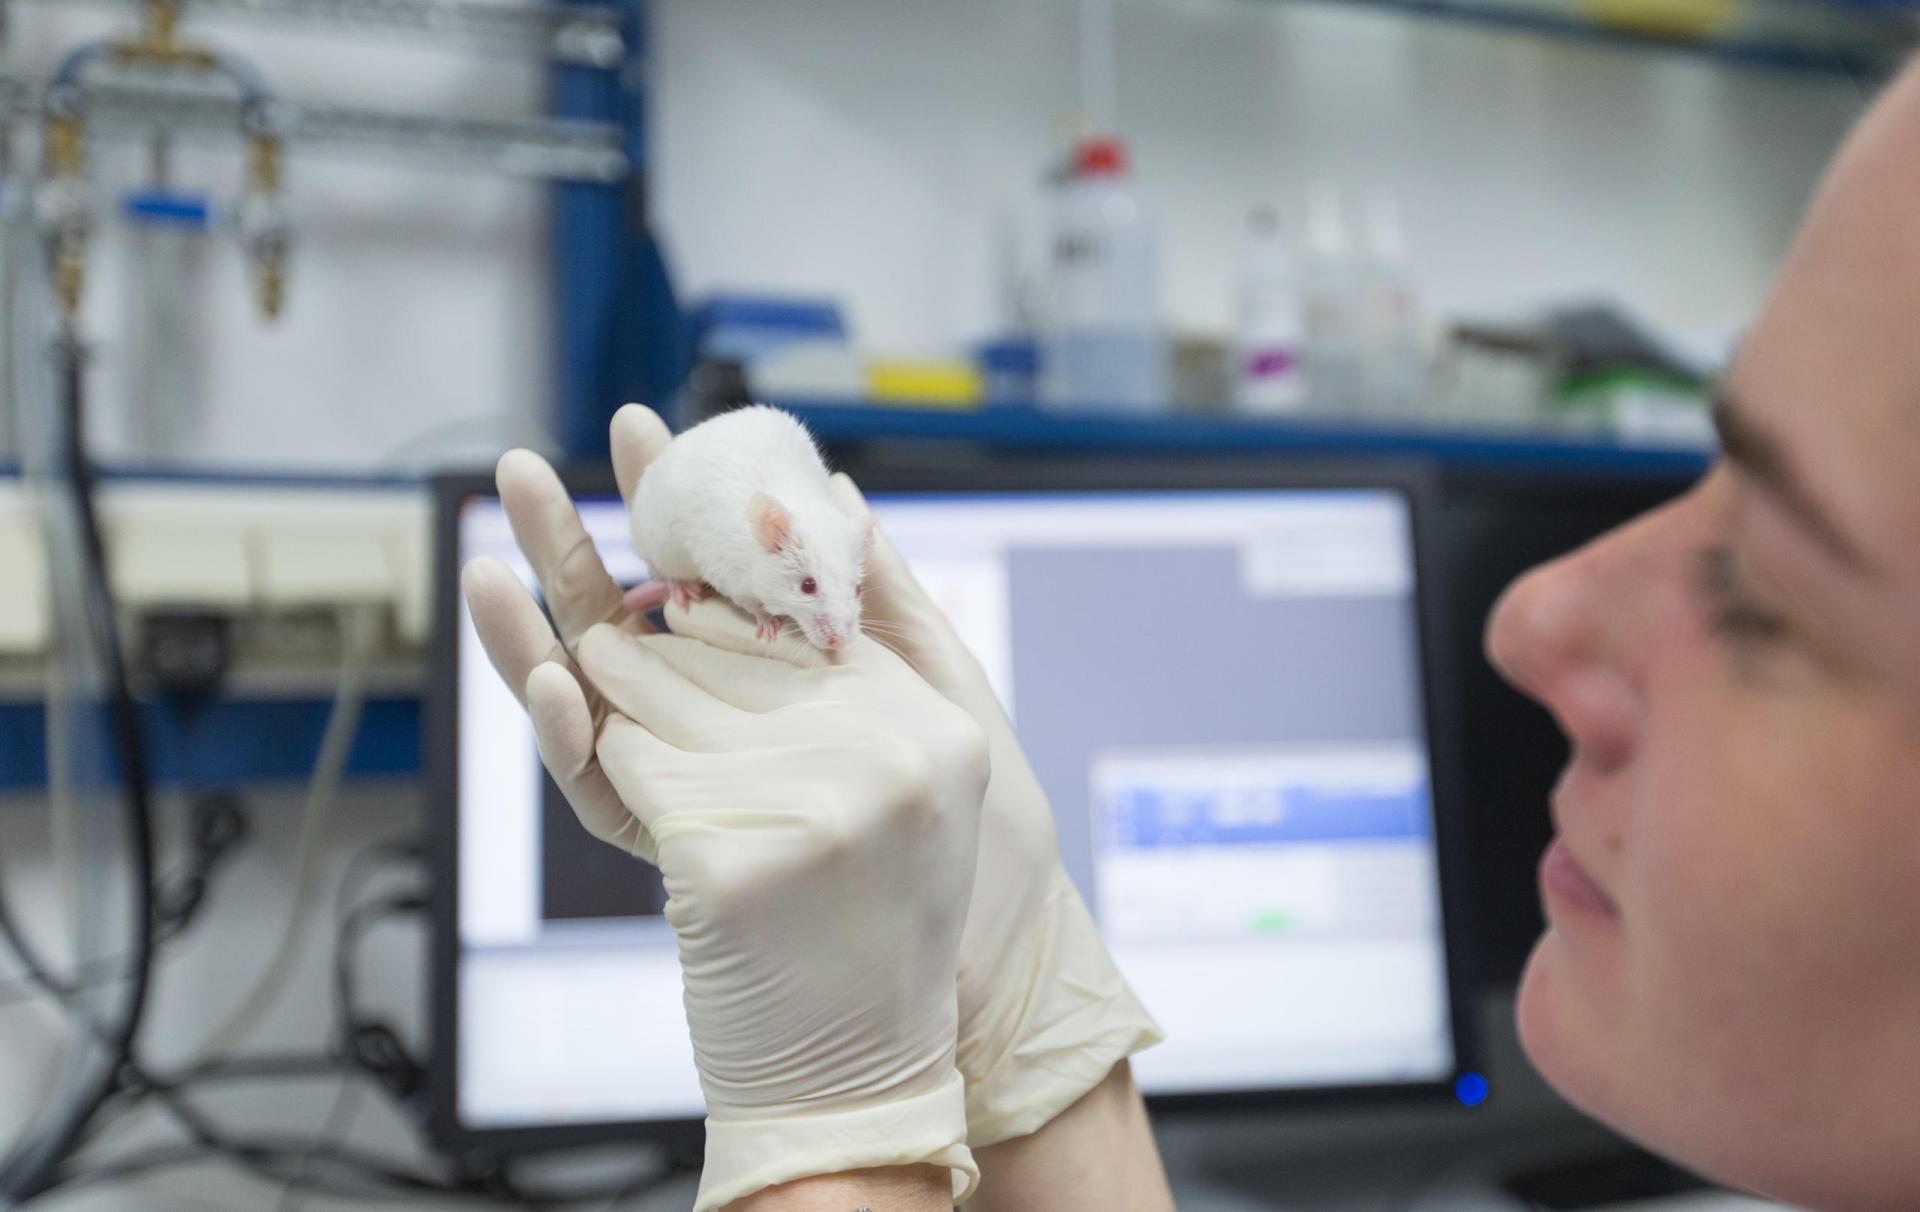 Should journalists be more critical of research involving animals? - SWI  